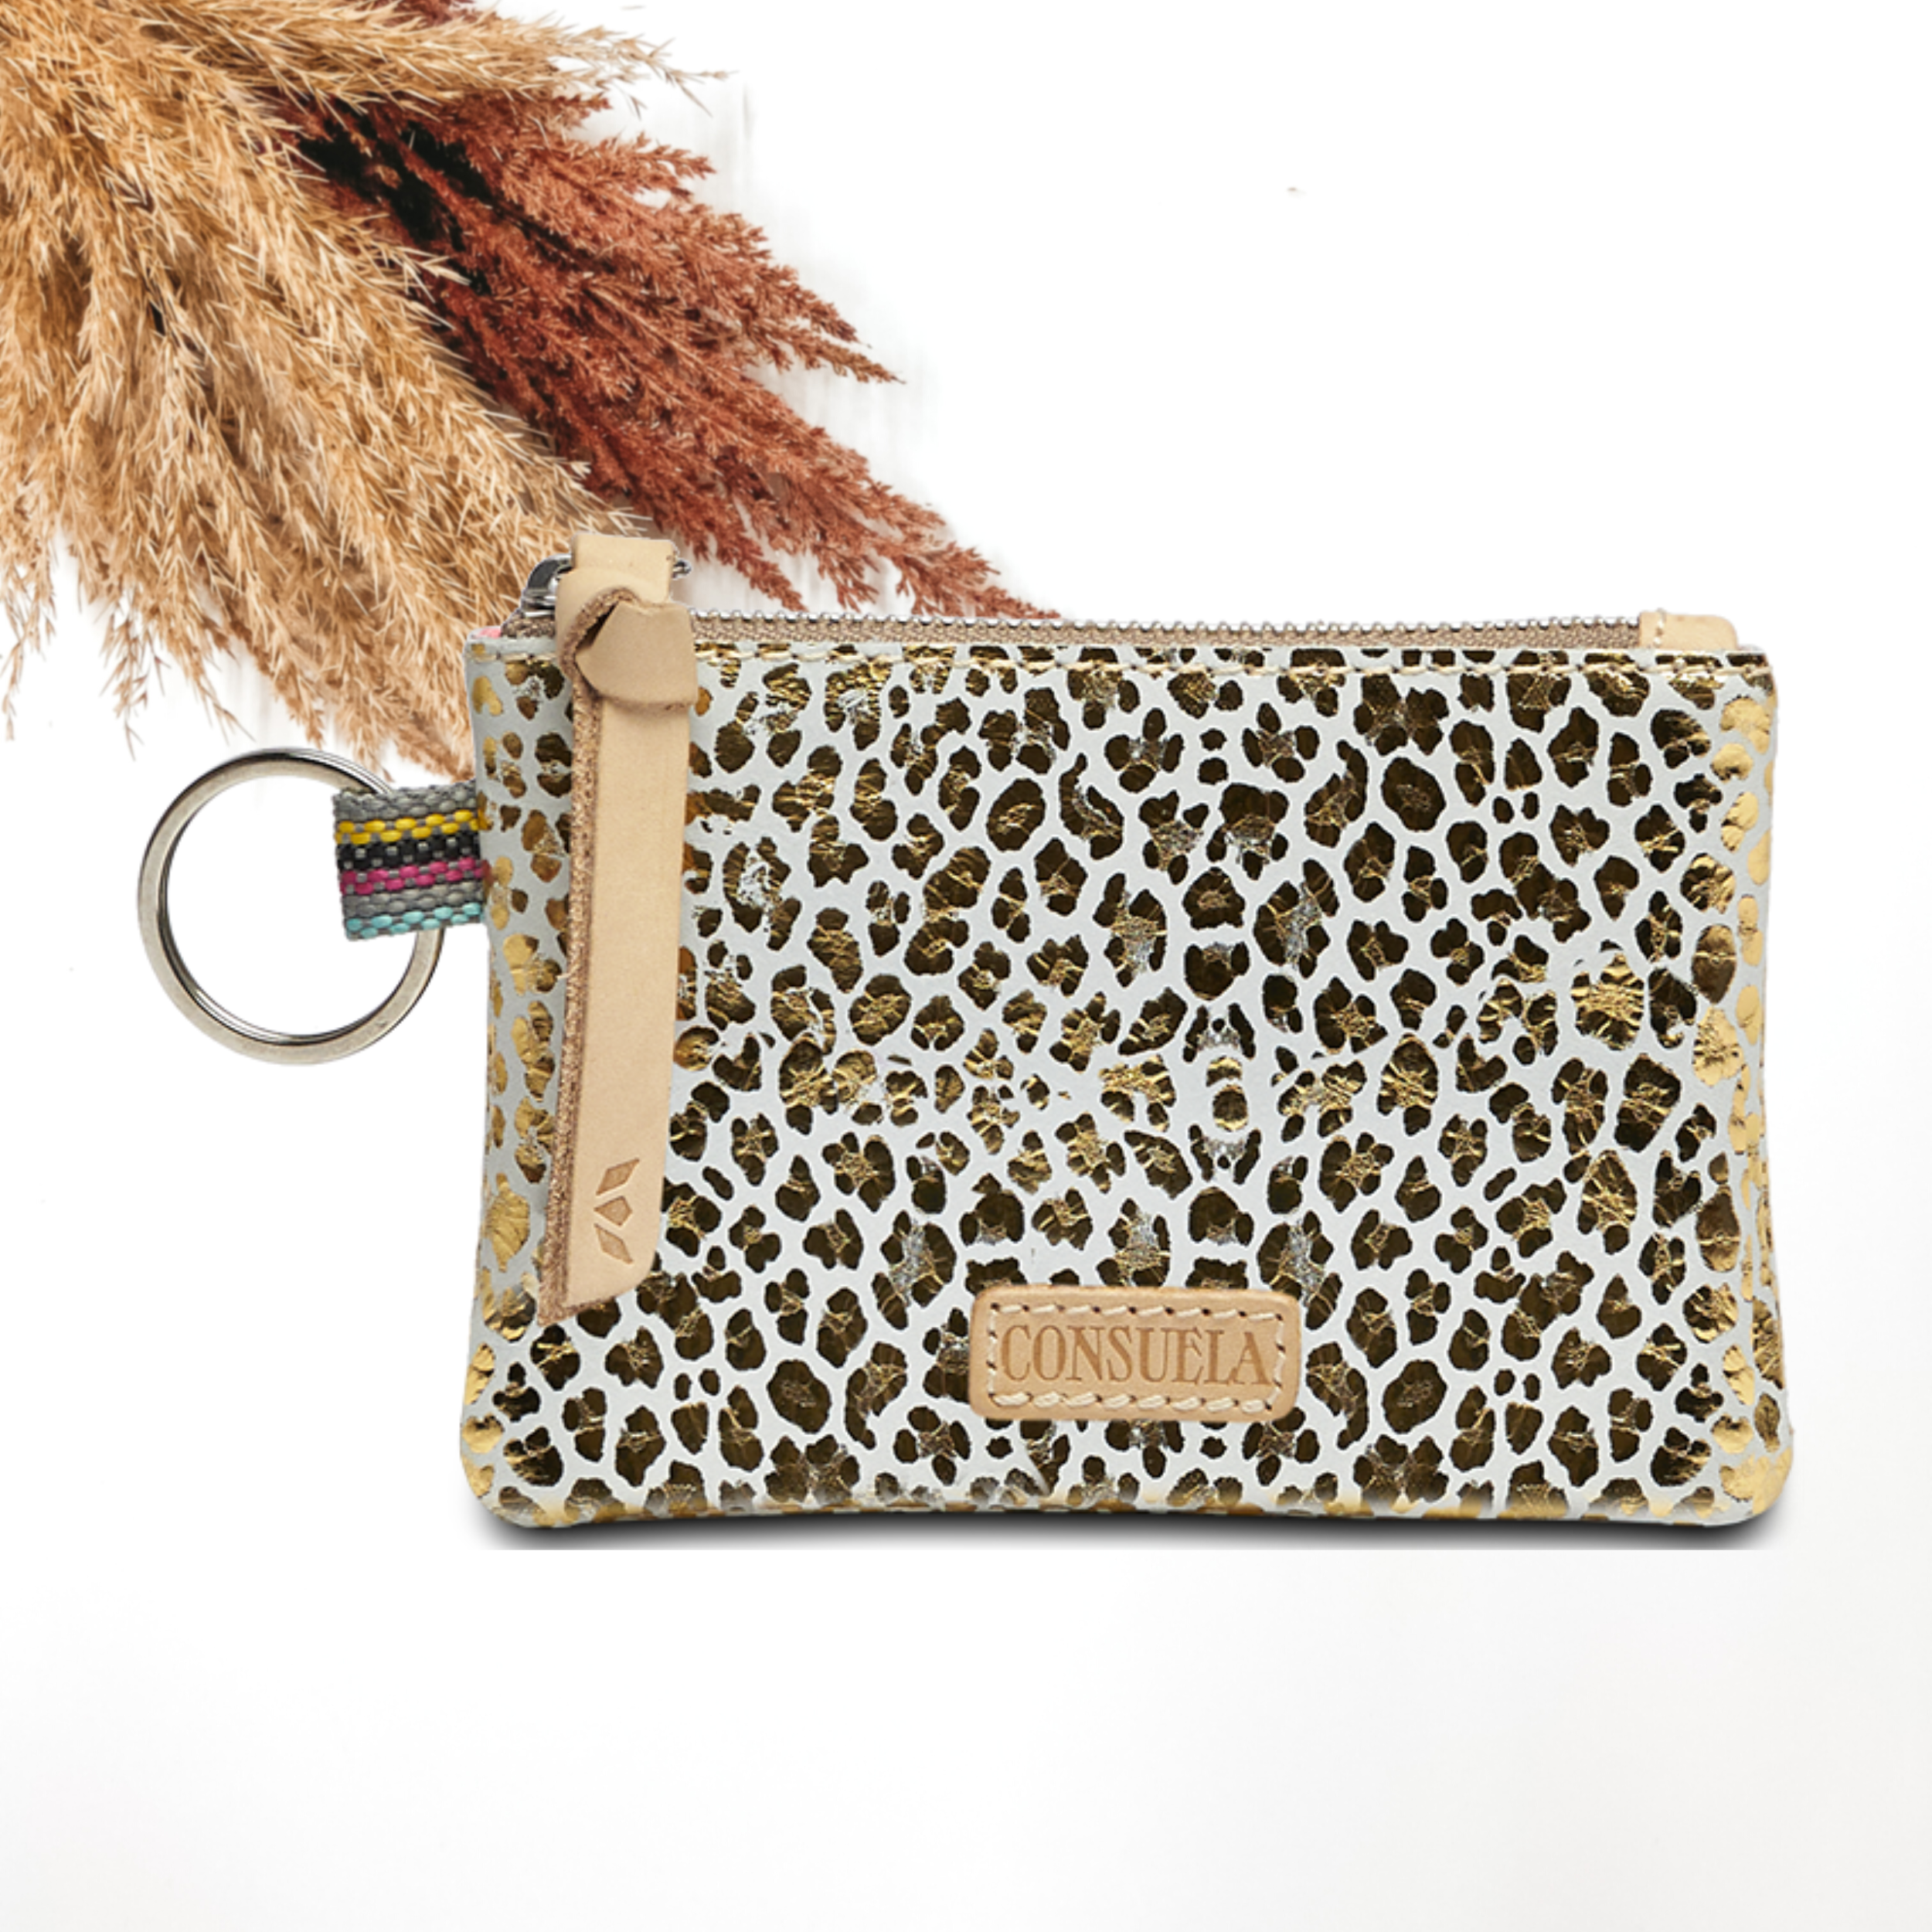 Pictured on a white background is a pouch with a light tan leather zipper pull on the yop and a silver key ring on the side. This pouch has a white with a metallic gold leopard print design. 